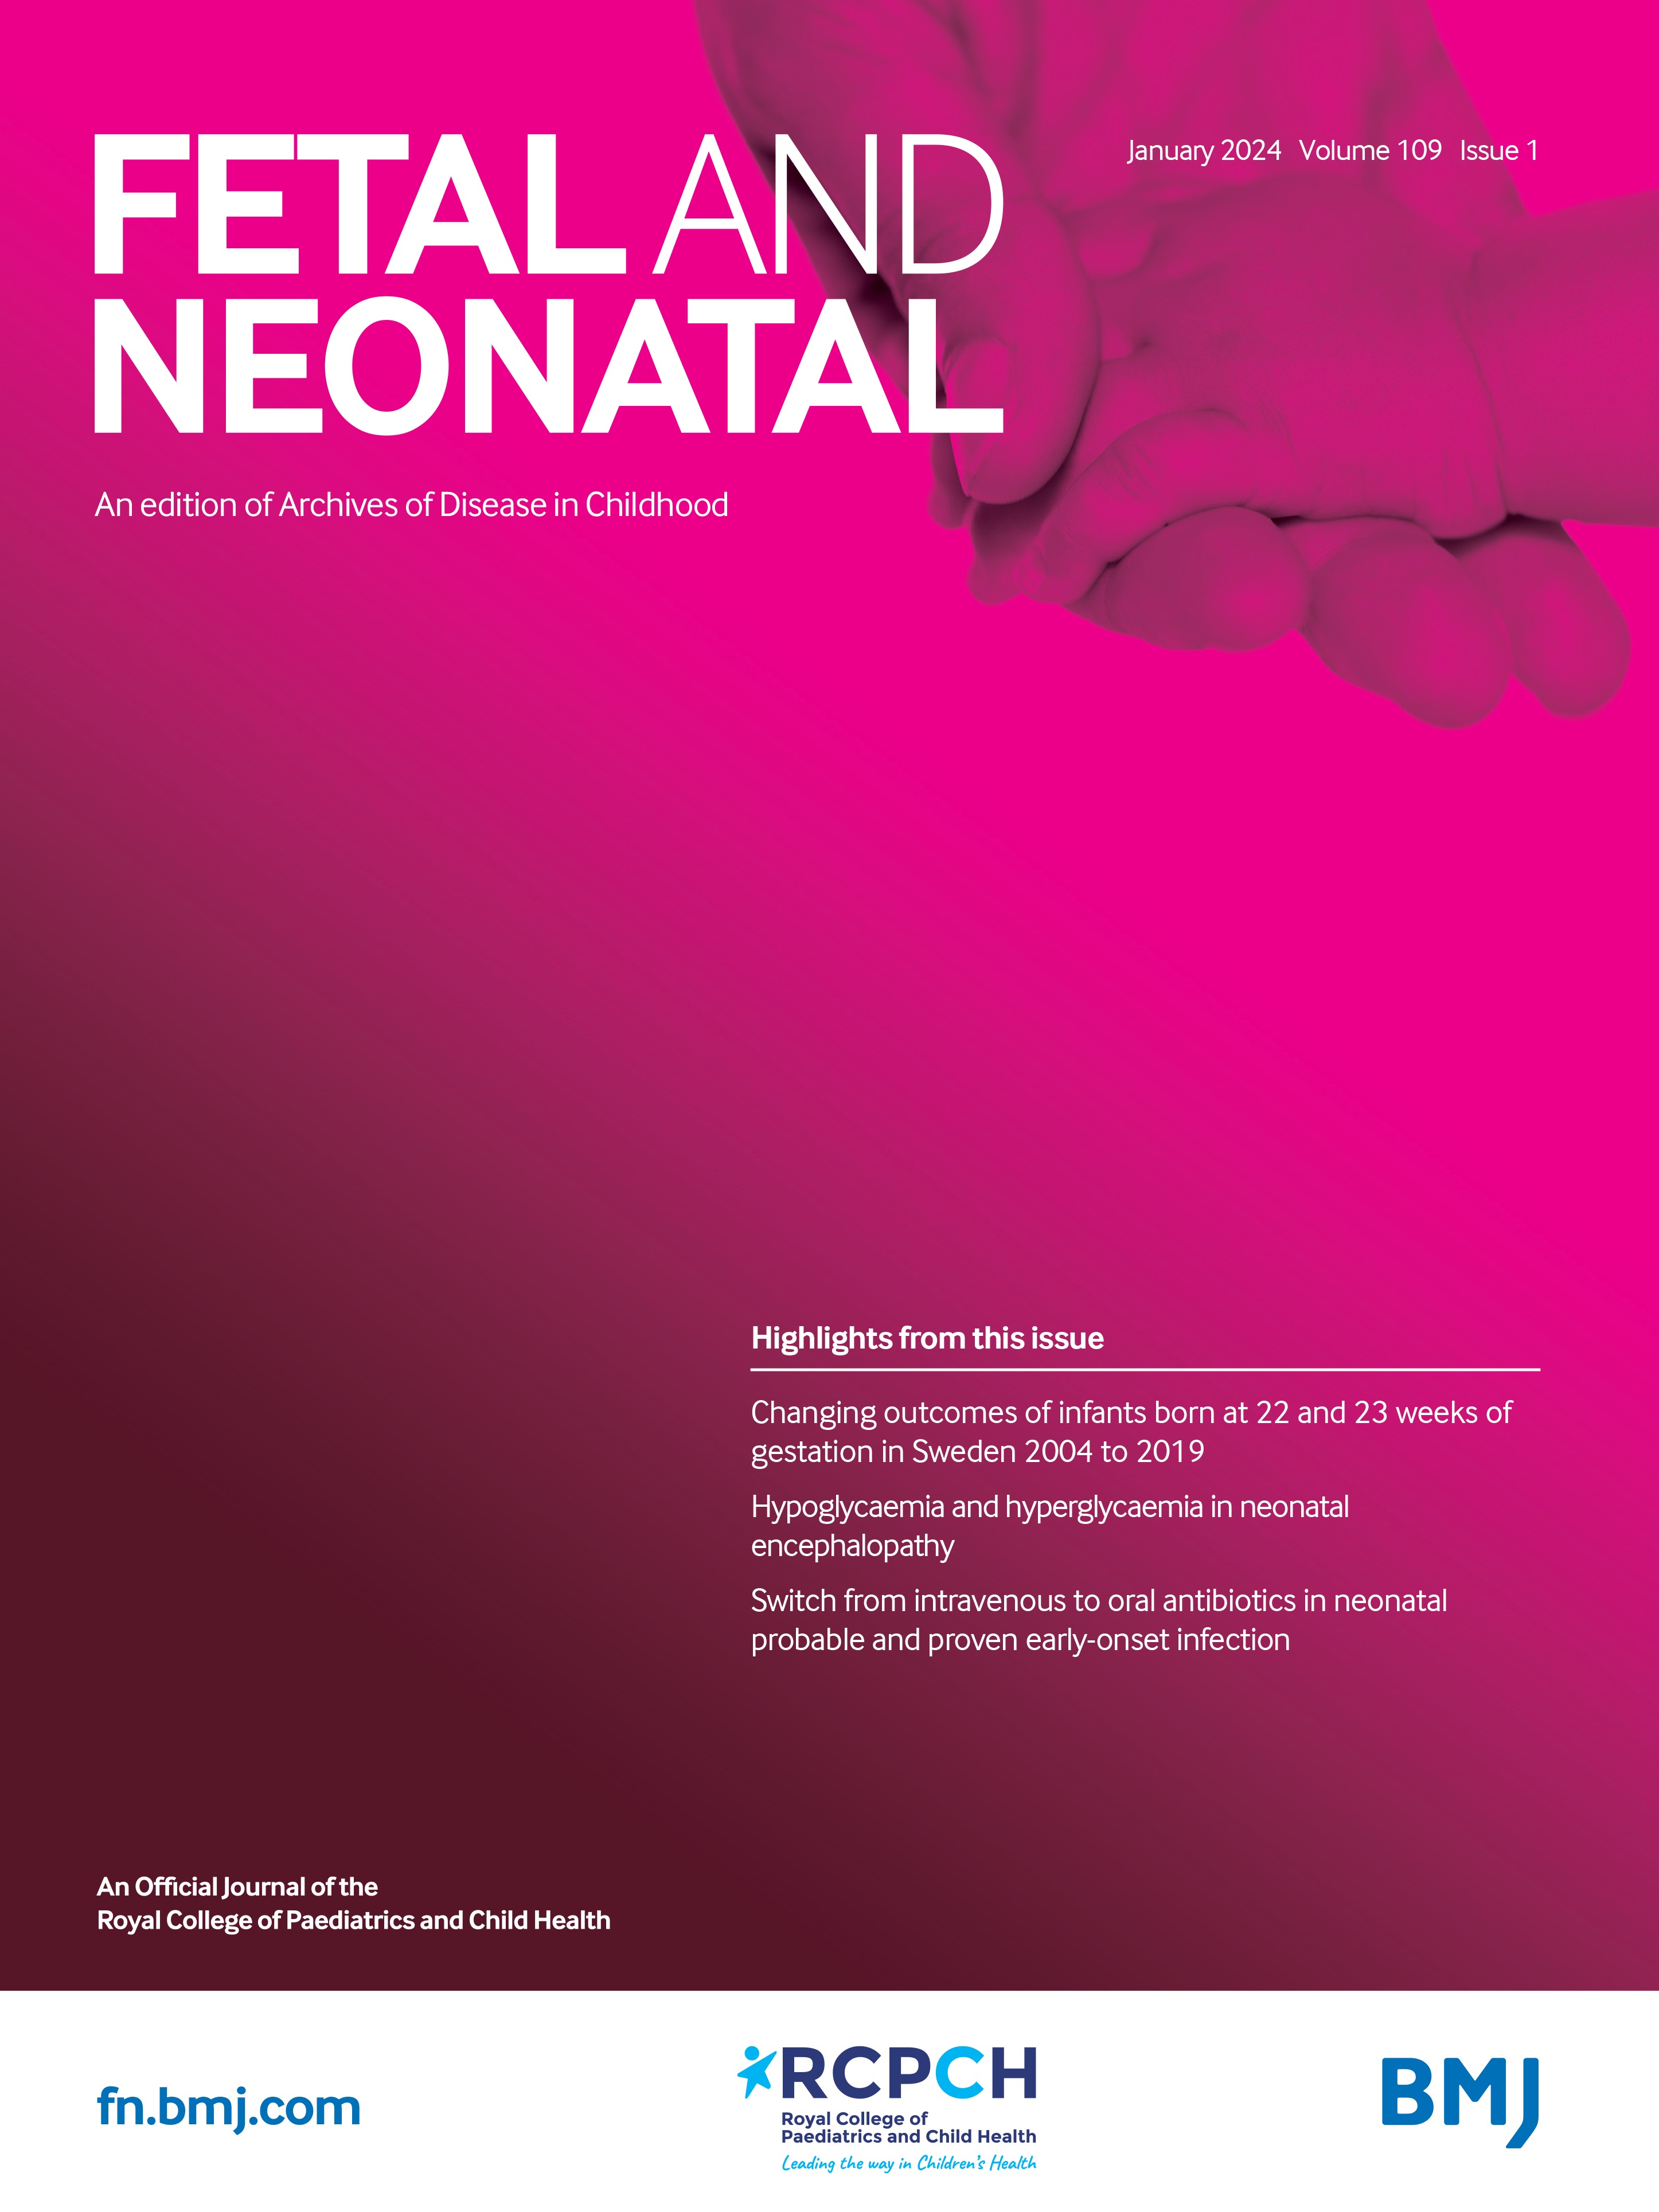 One-year survival and outcomes of infants born at 22 and 23 weeks of gestation in Sweden 2004-2007, 2014-2016 and 2017-2019